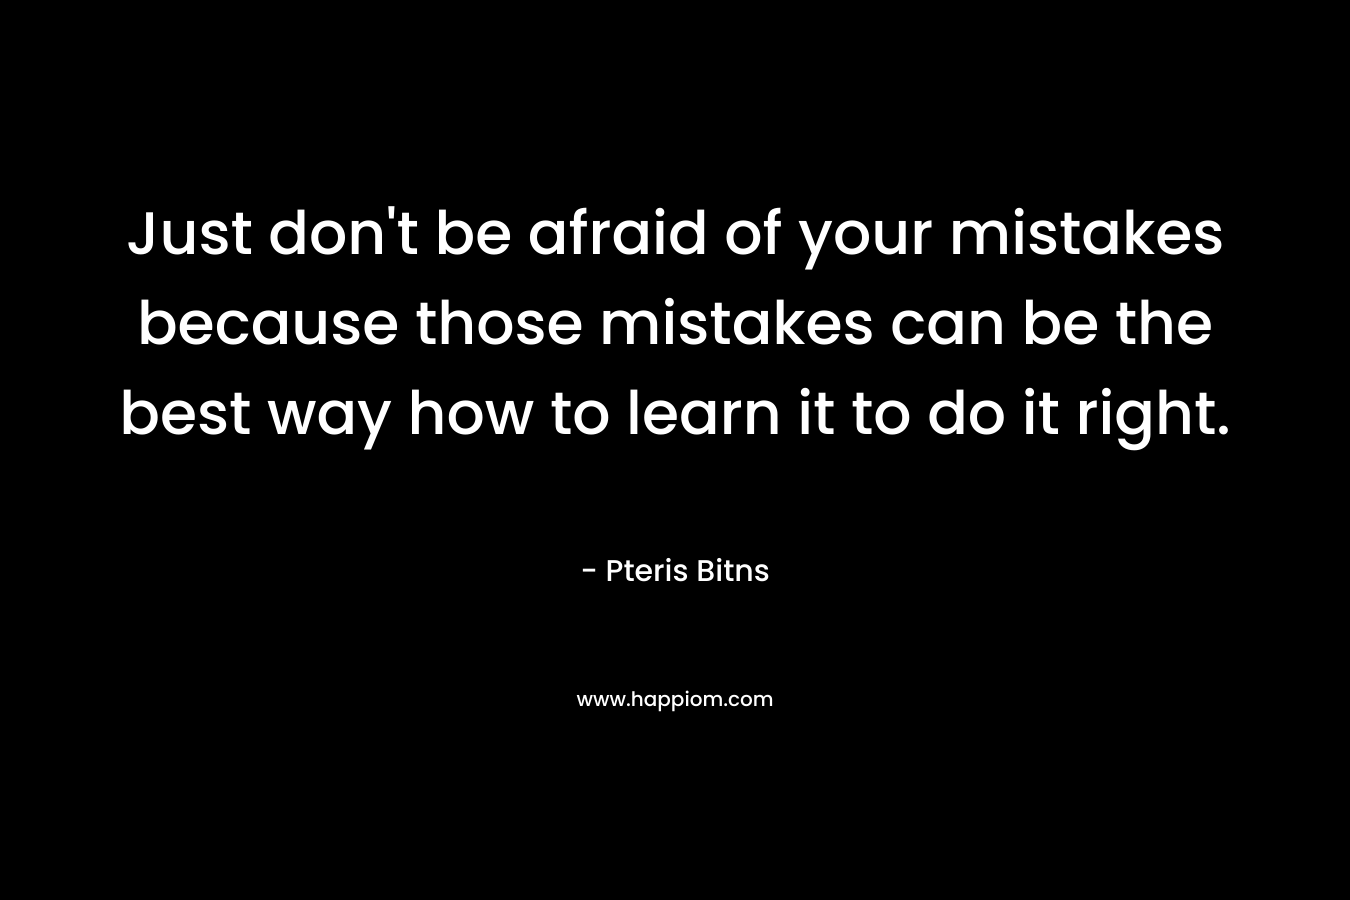 Just don't be afraid of your mistakes because those mistakes can be the best way how to learn it to do it right.